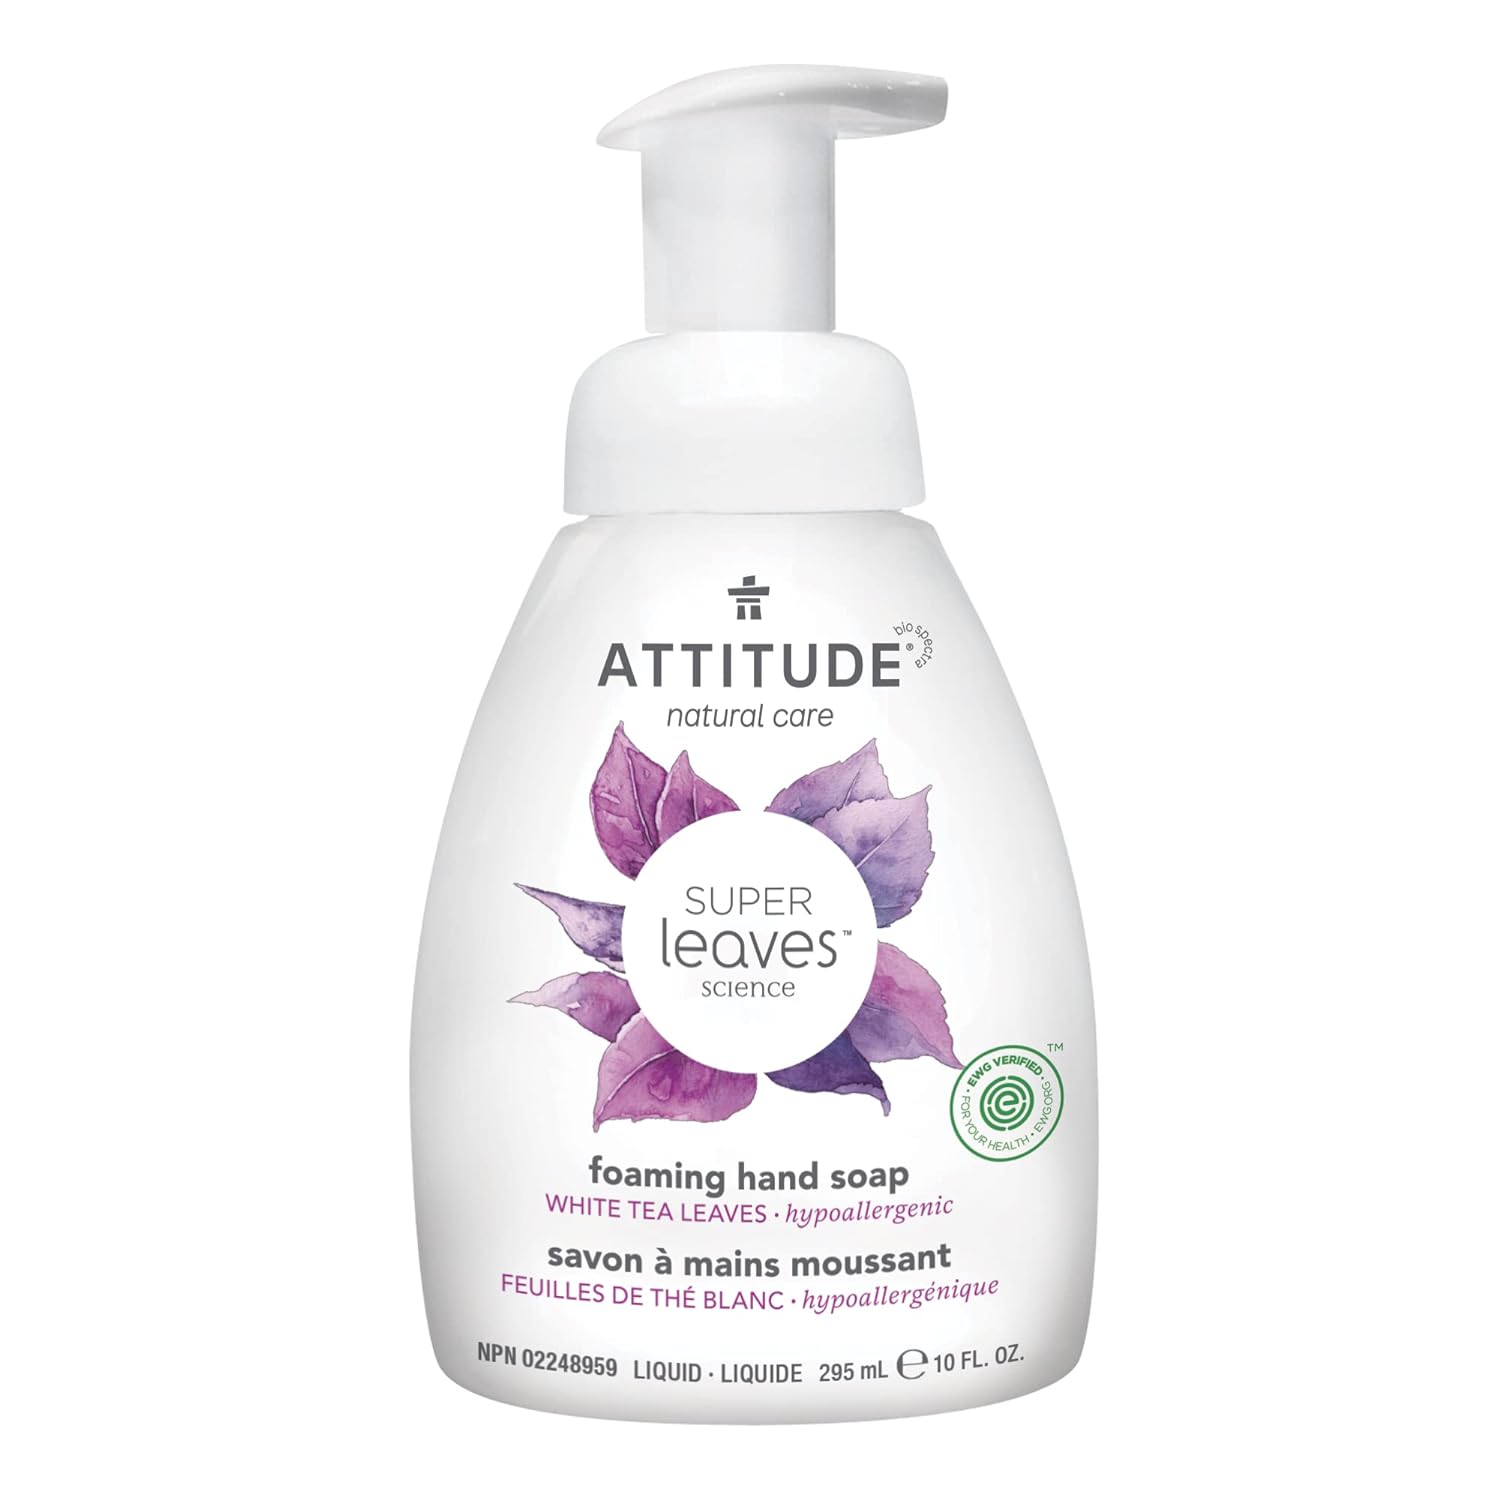 ATTITUDE Foaming Hand Soap, EWG Verified, Dermatologically Tested, Plant and Mineral-Based, Vegan Personal Care Products, White Tea Leaves, 10 Fl Oz